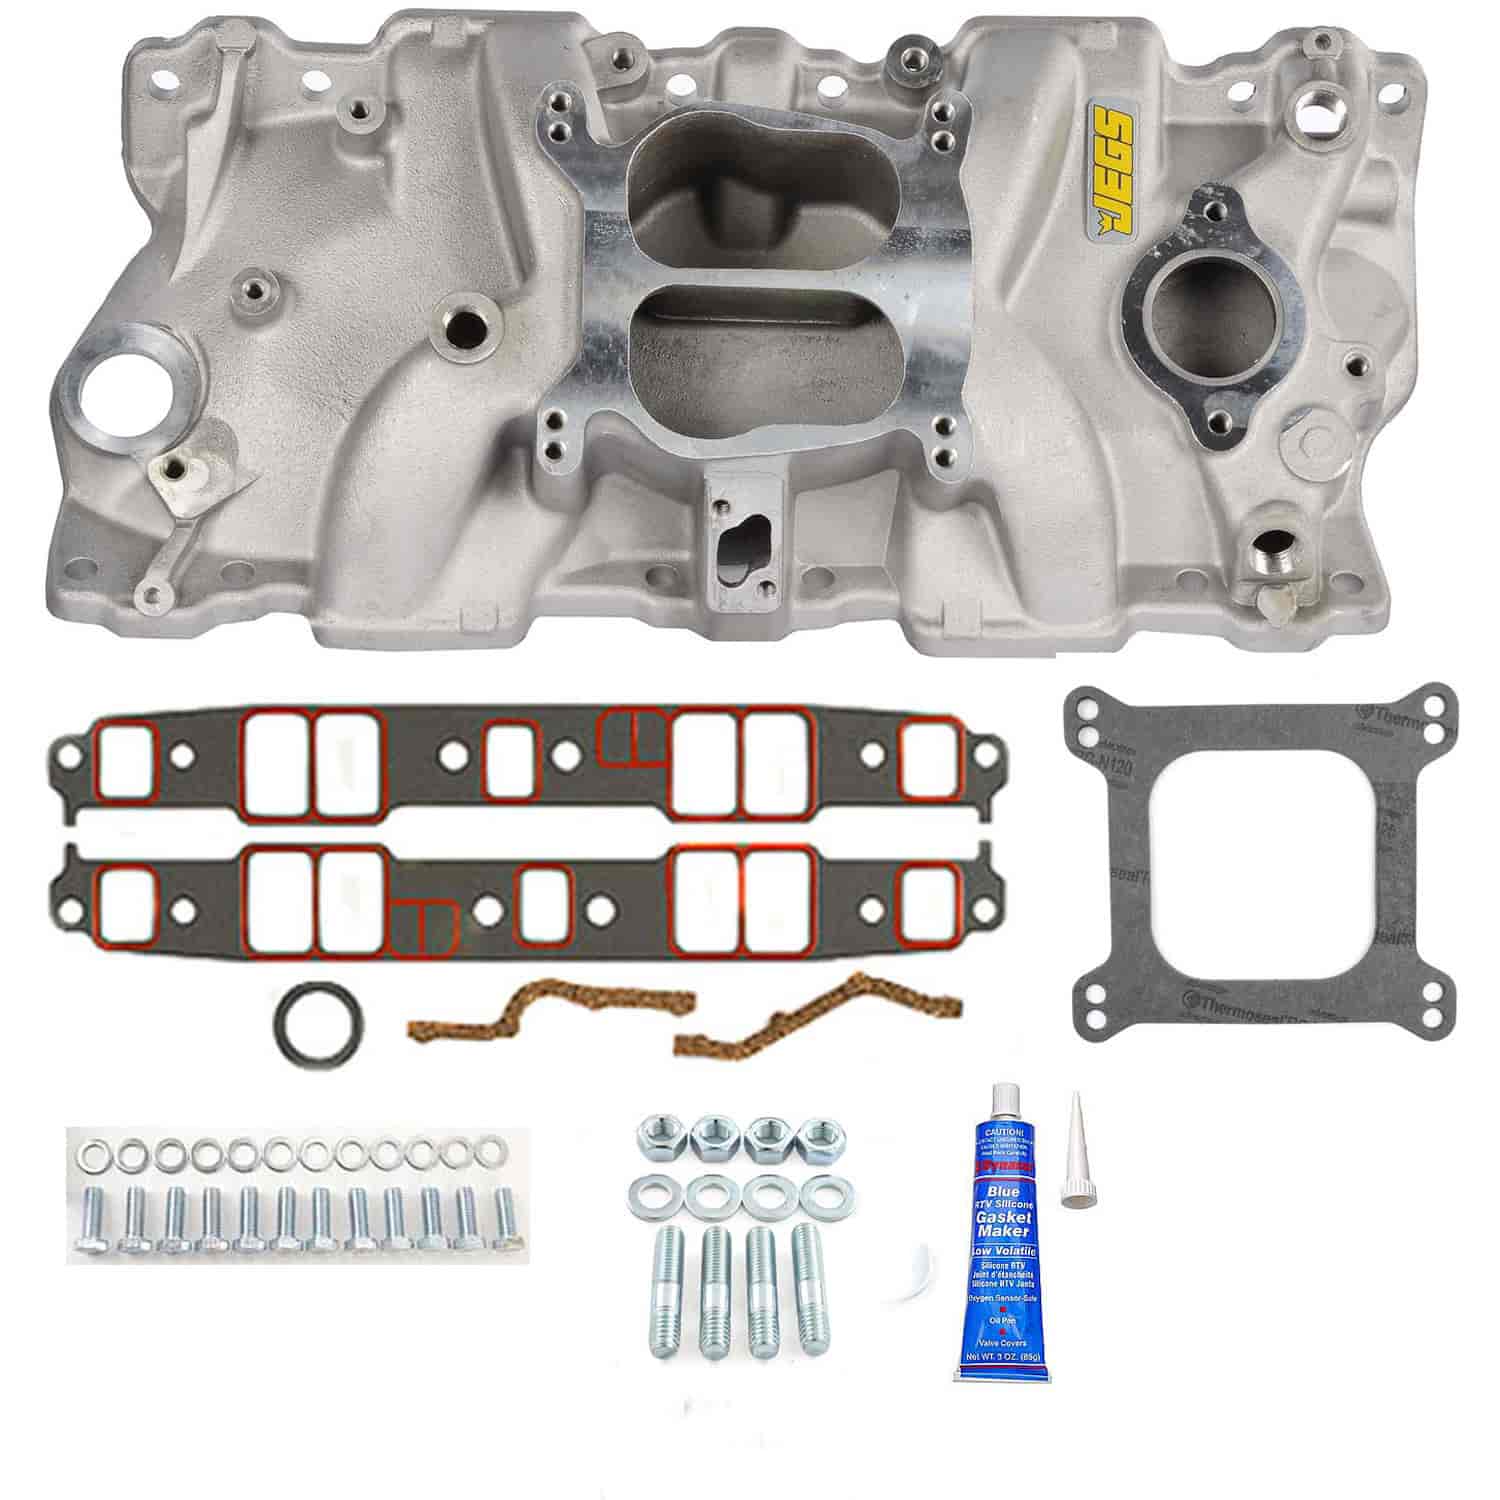 Intake Manifold with Installation Kit for 1955-1986 Small Block Chevy 262-400